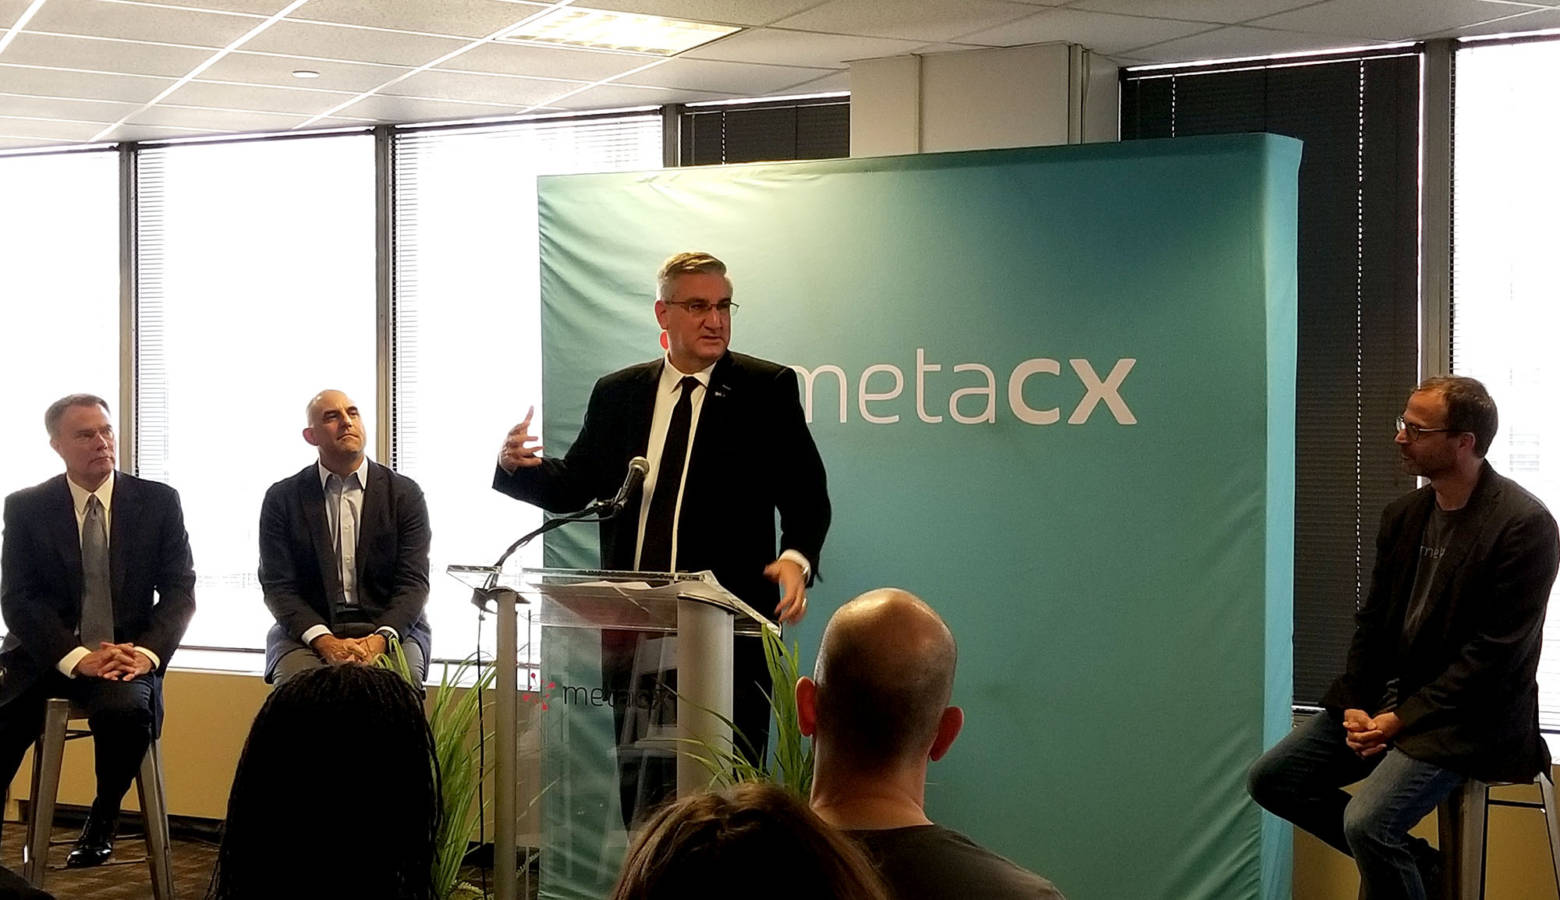 Gov. Eric Holcomb joined by city and MetaCX leaders gives remarks on the tech companies growth. (Samantha Horton/IPB News)